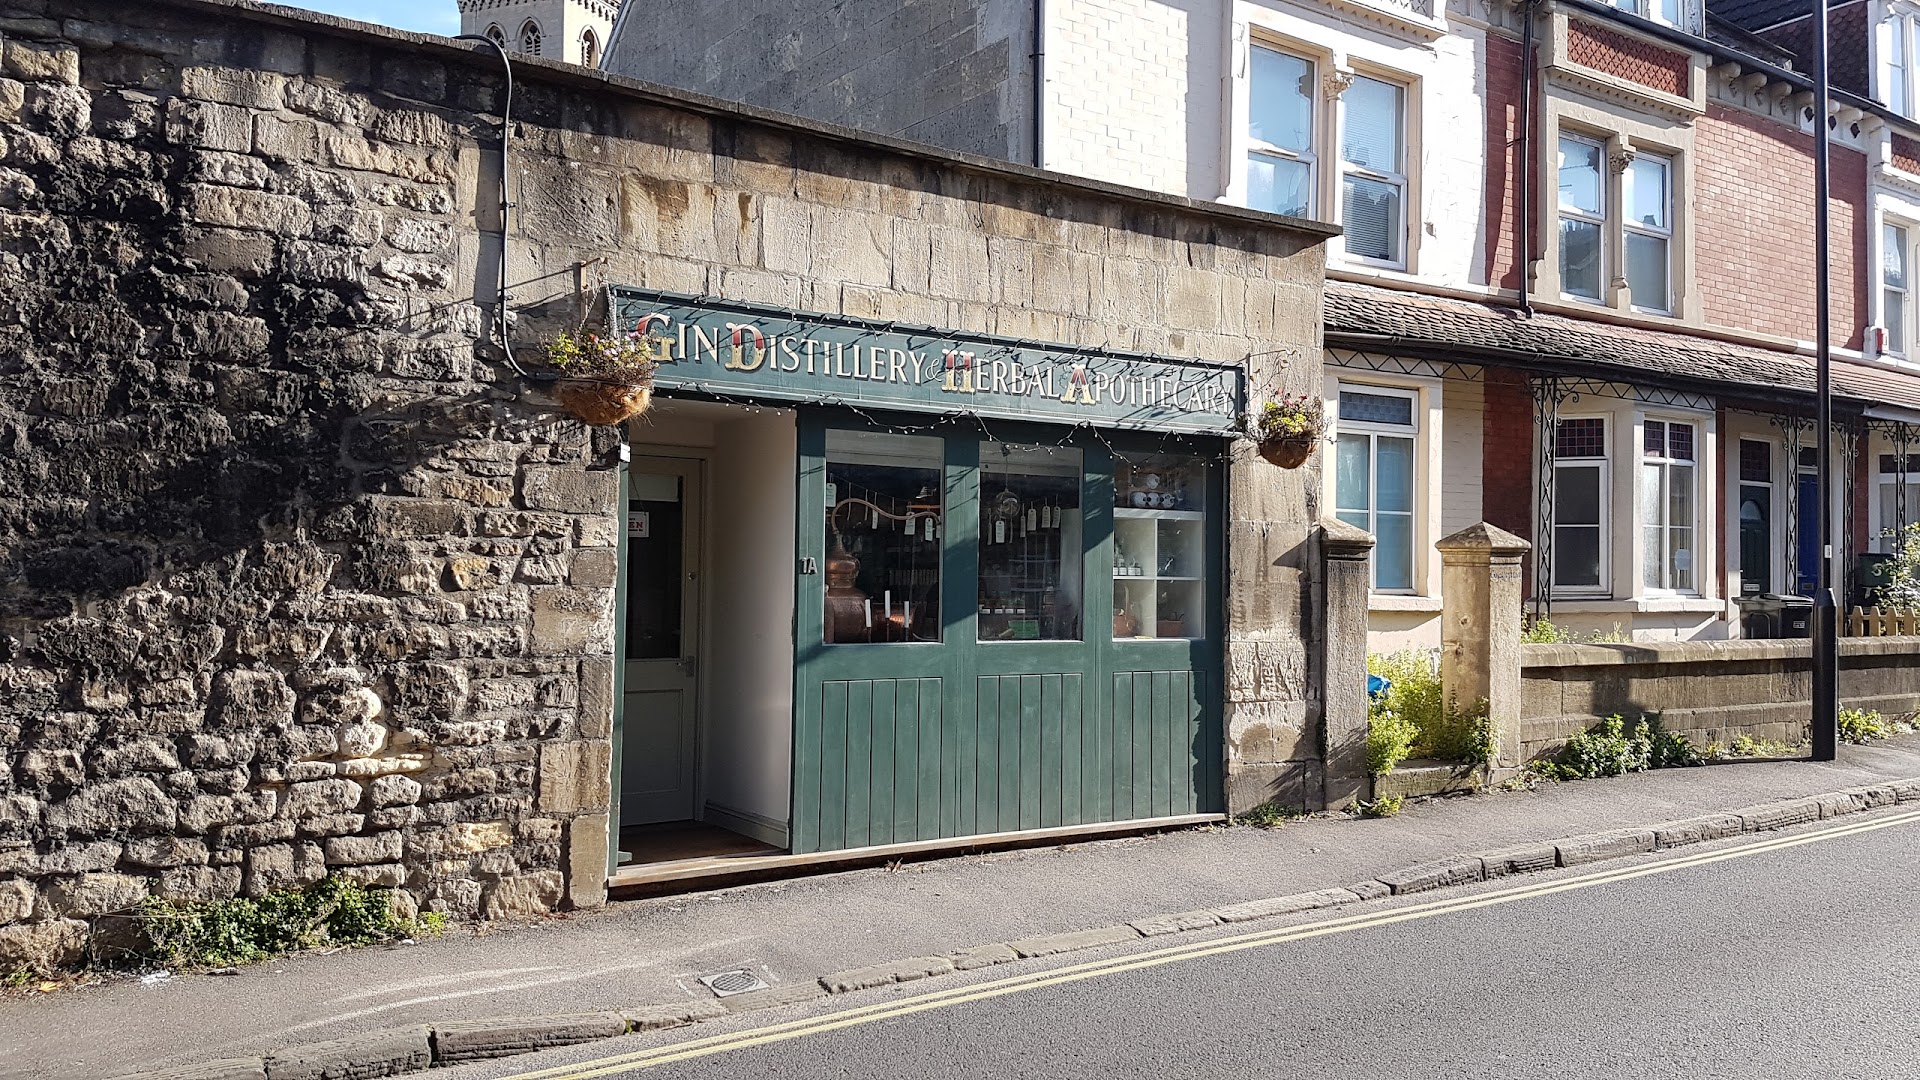 Bath Botanical Gin Distillery and Herbal Apothecary